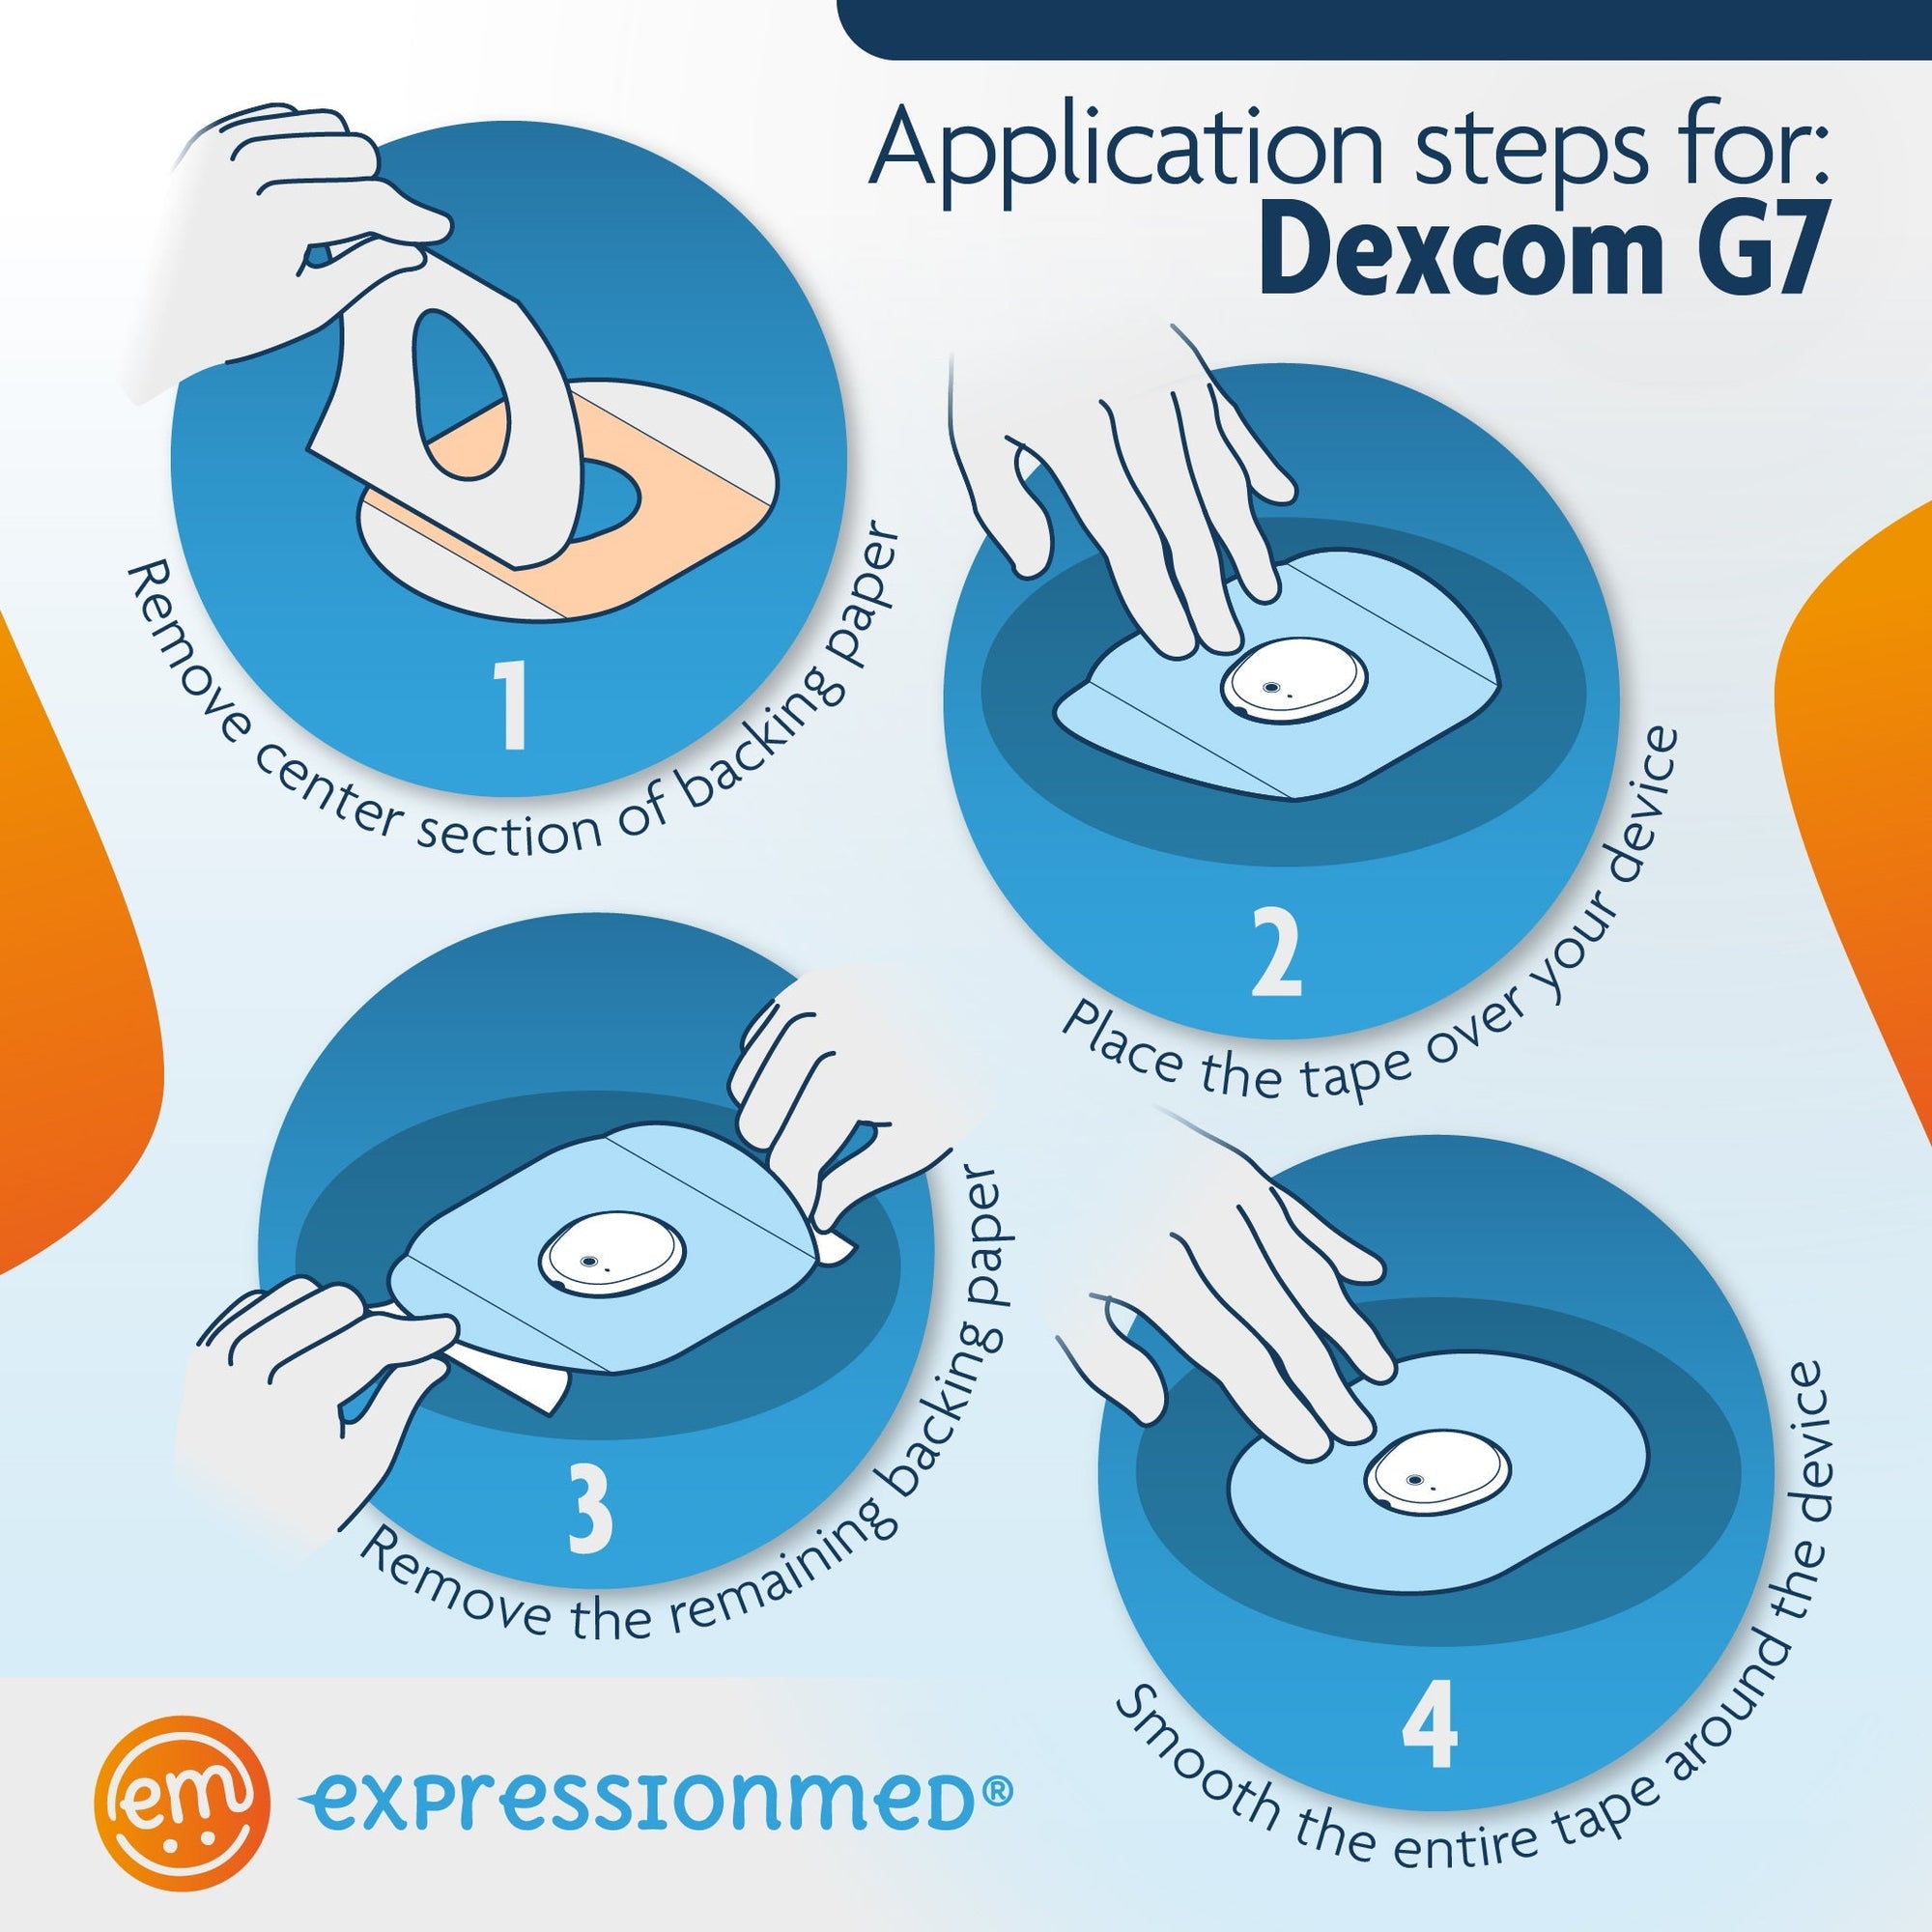 ExpressionMed Application Instructions. 1. Prep skin with soap and water. 2. Remove Middle Section and lay center hole over device. 3. Peel off both end sections and smooth down on skin. To remove, hold an edge and strech material off skin., Dexcom Stelo Glucose Biosensor System